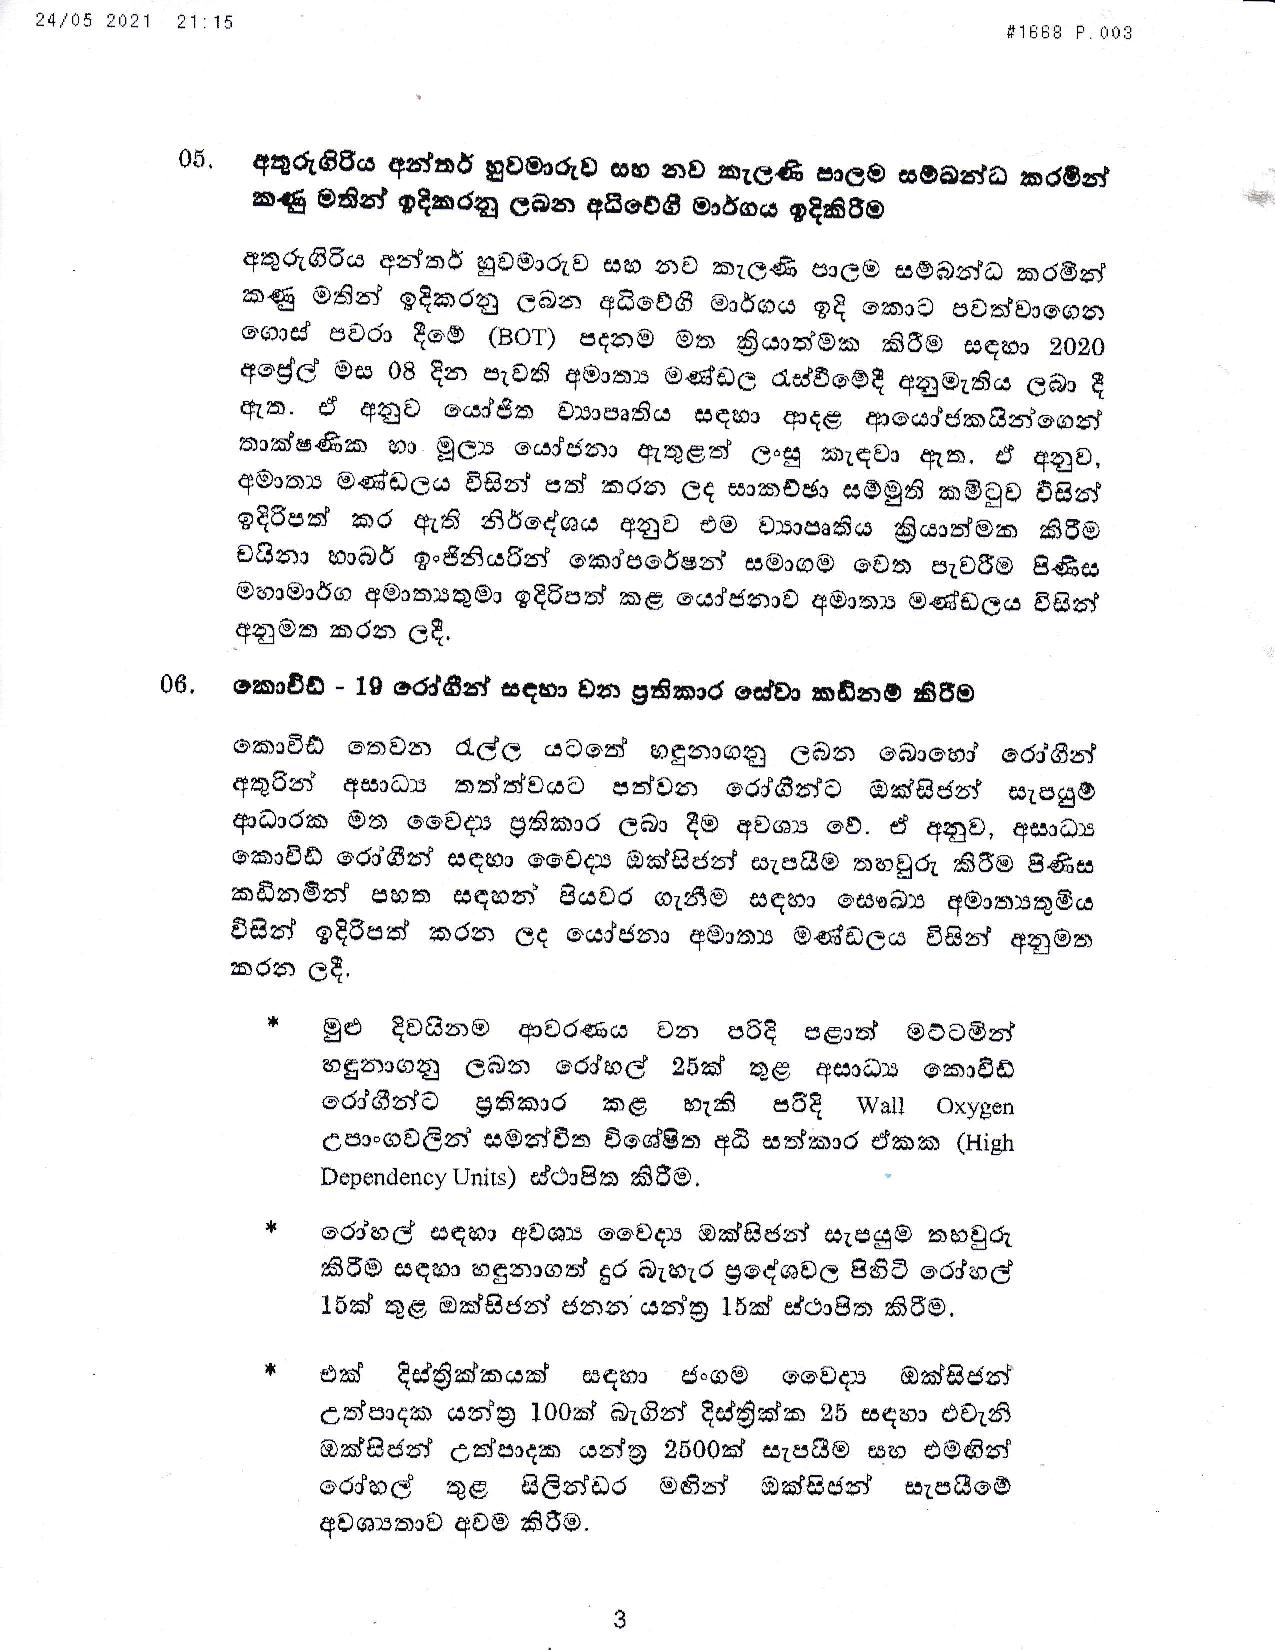 Cabinet Decisions on 24.05.2021 Sinhala page 003